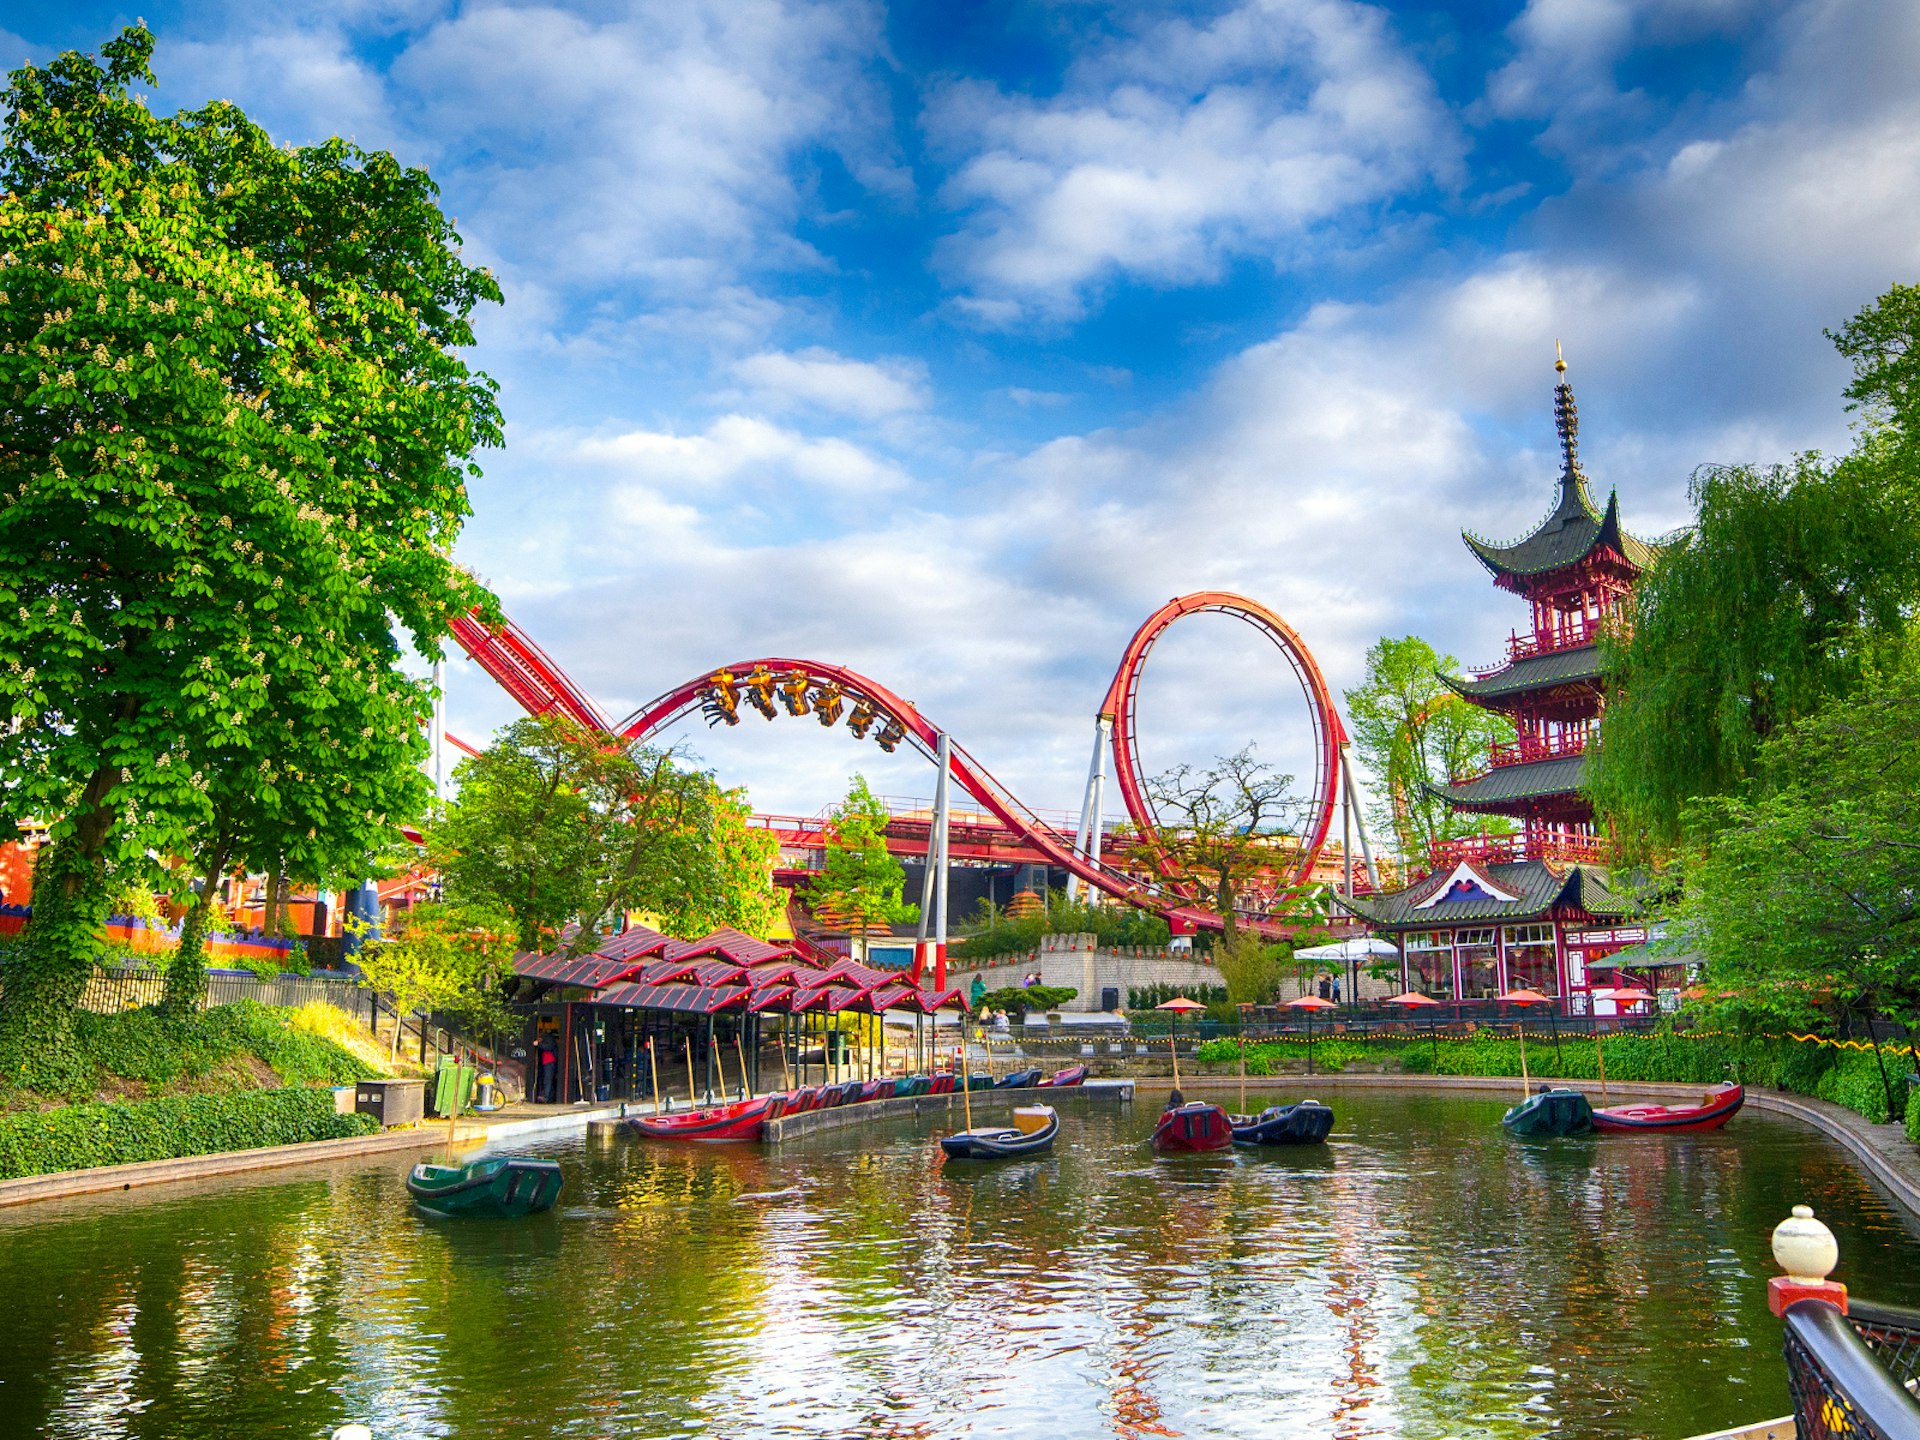 Disney alternatives - Colourful Tivoli Gardens in Copenhagen. A red rollercoaster twists over the park's lake which has small green and red boats floating on it